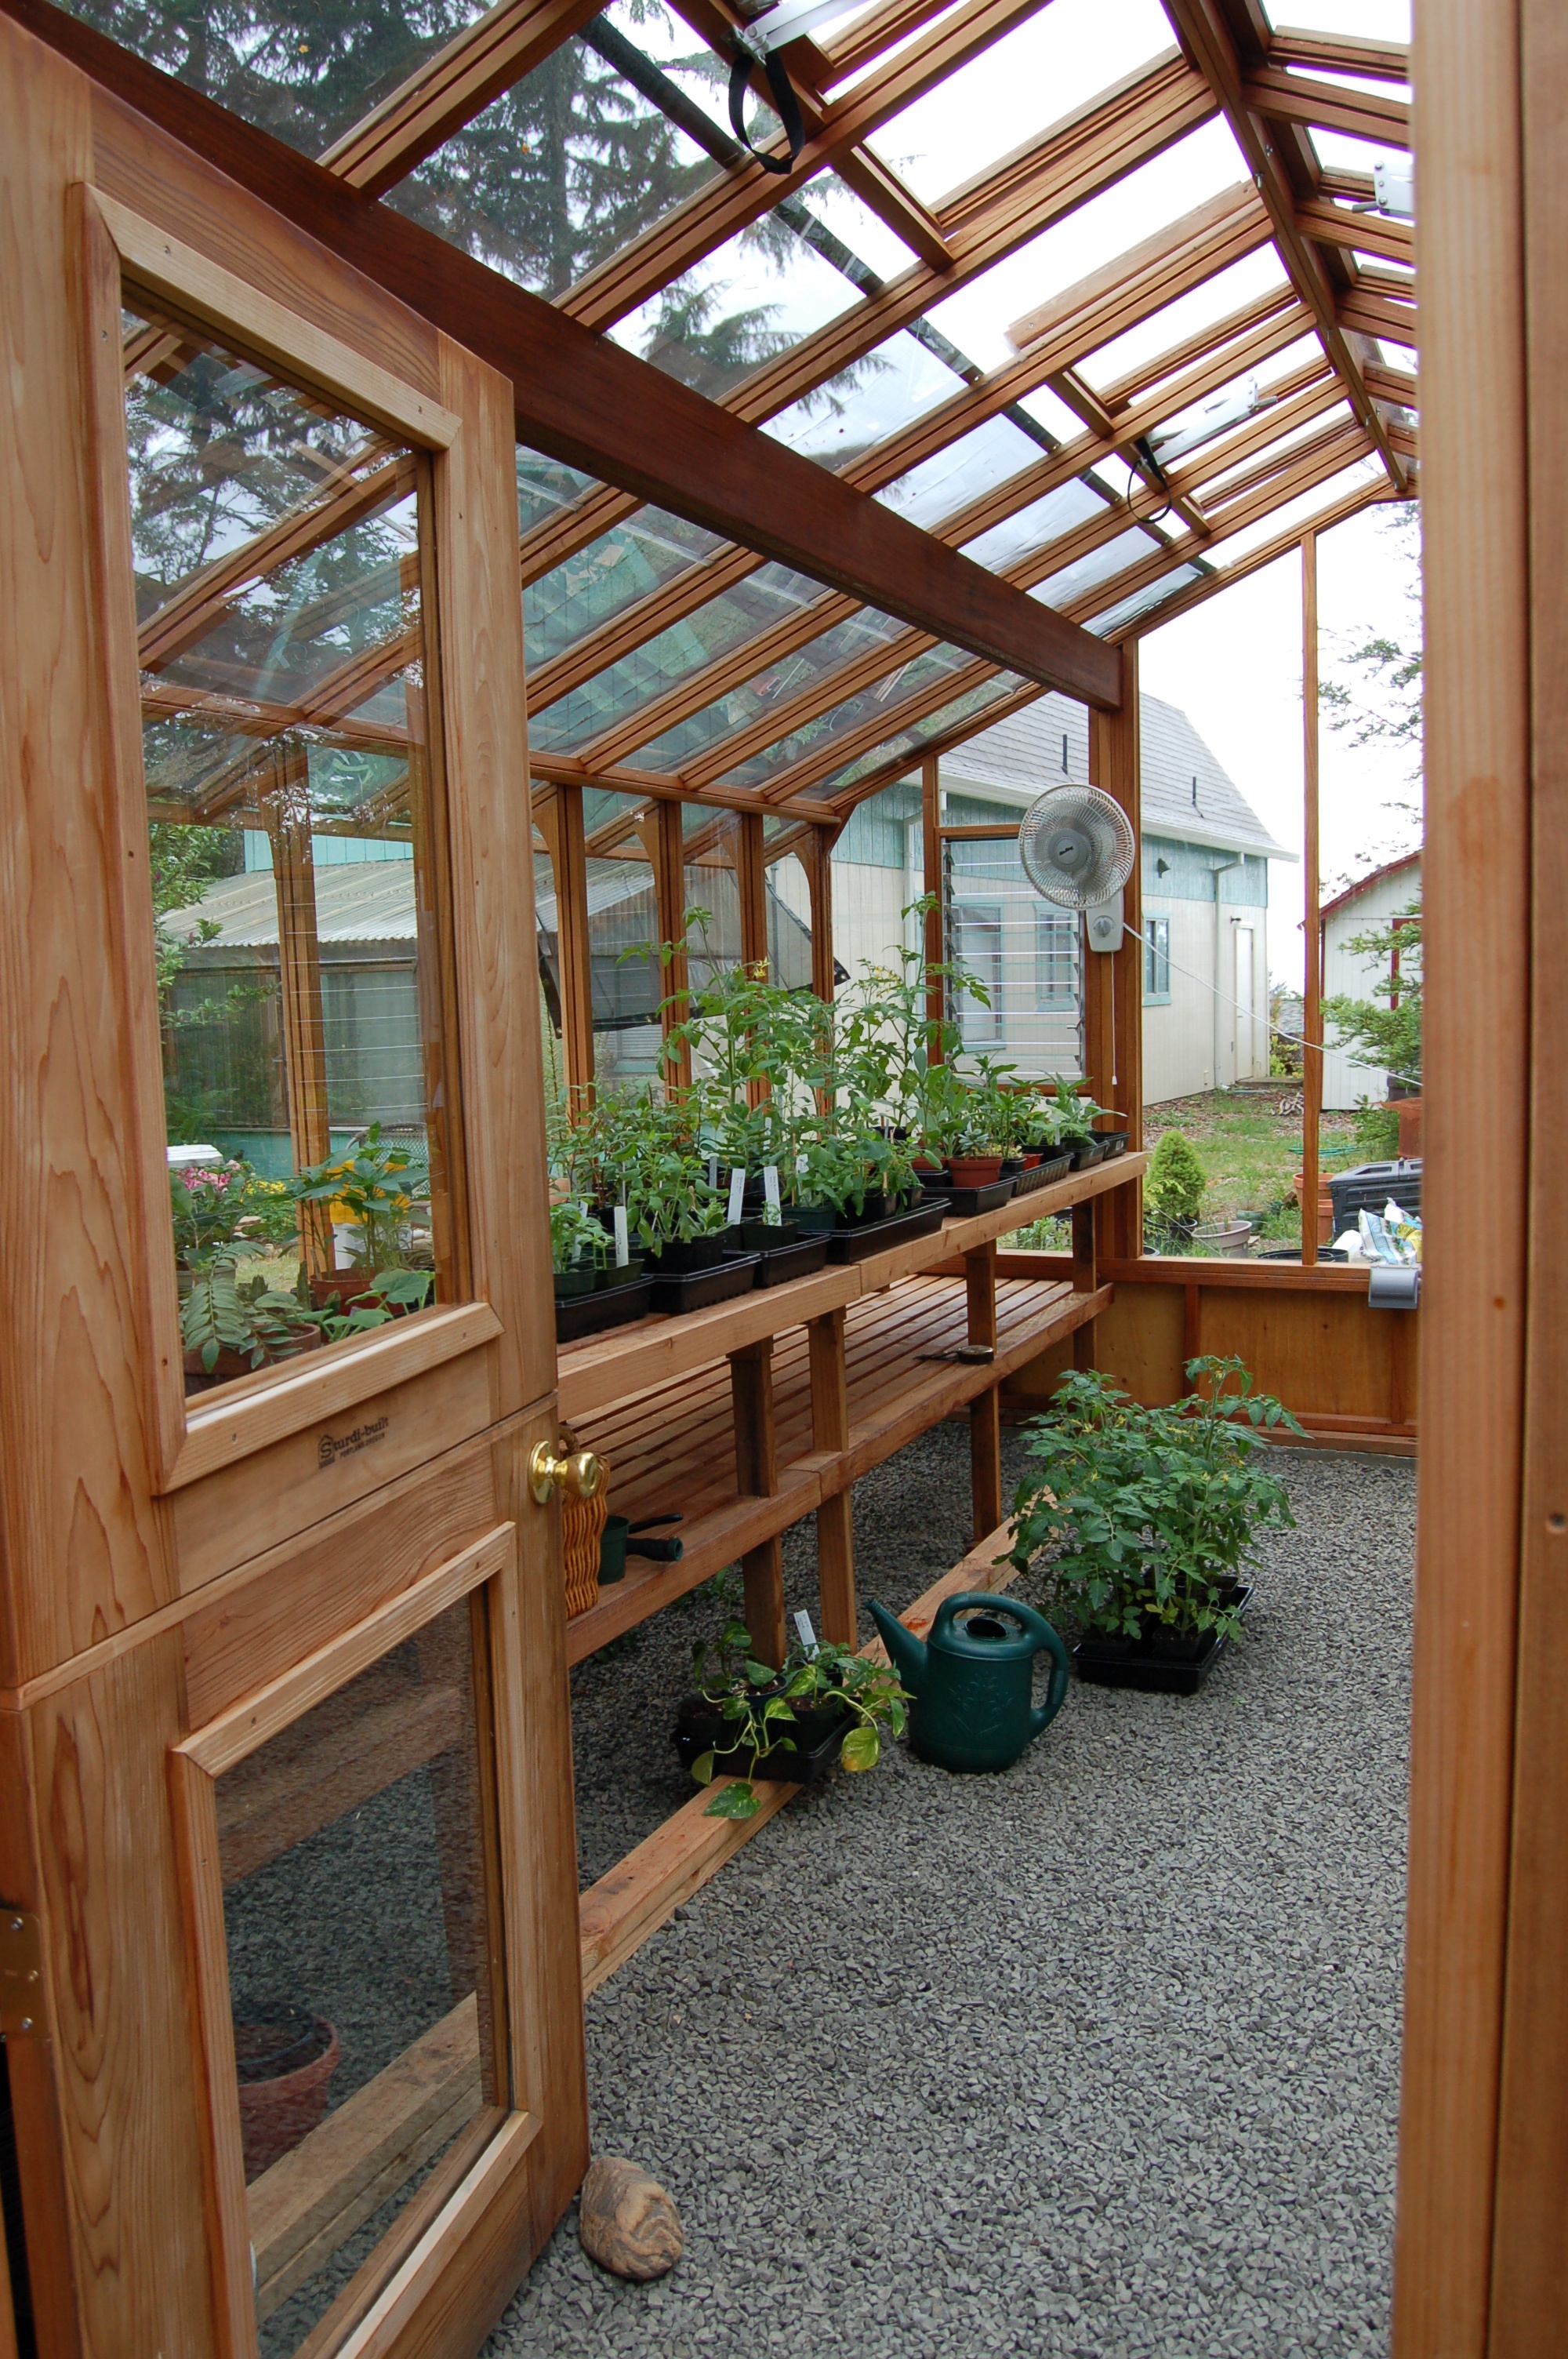 Interior of 12x16 Garden Deluxe with Dutch door option and two-tier benches